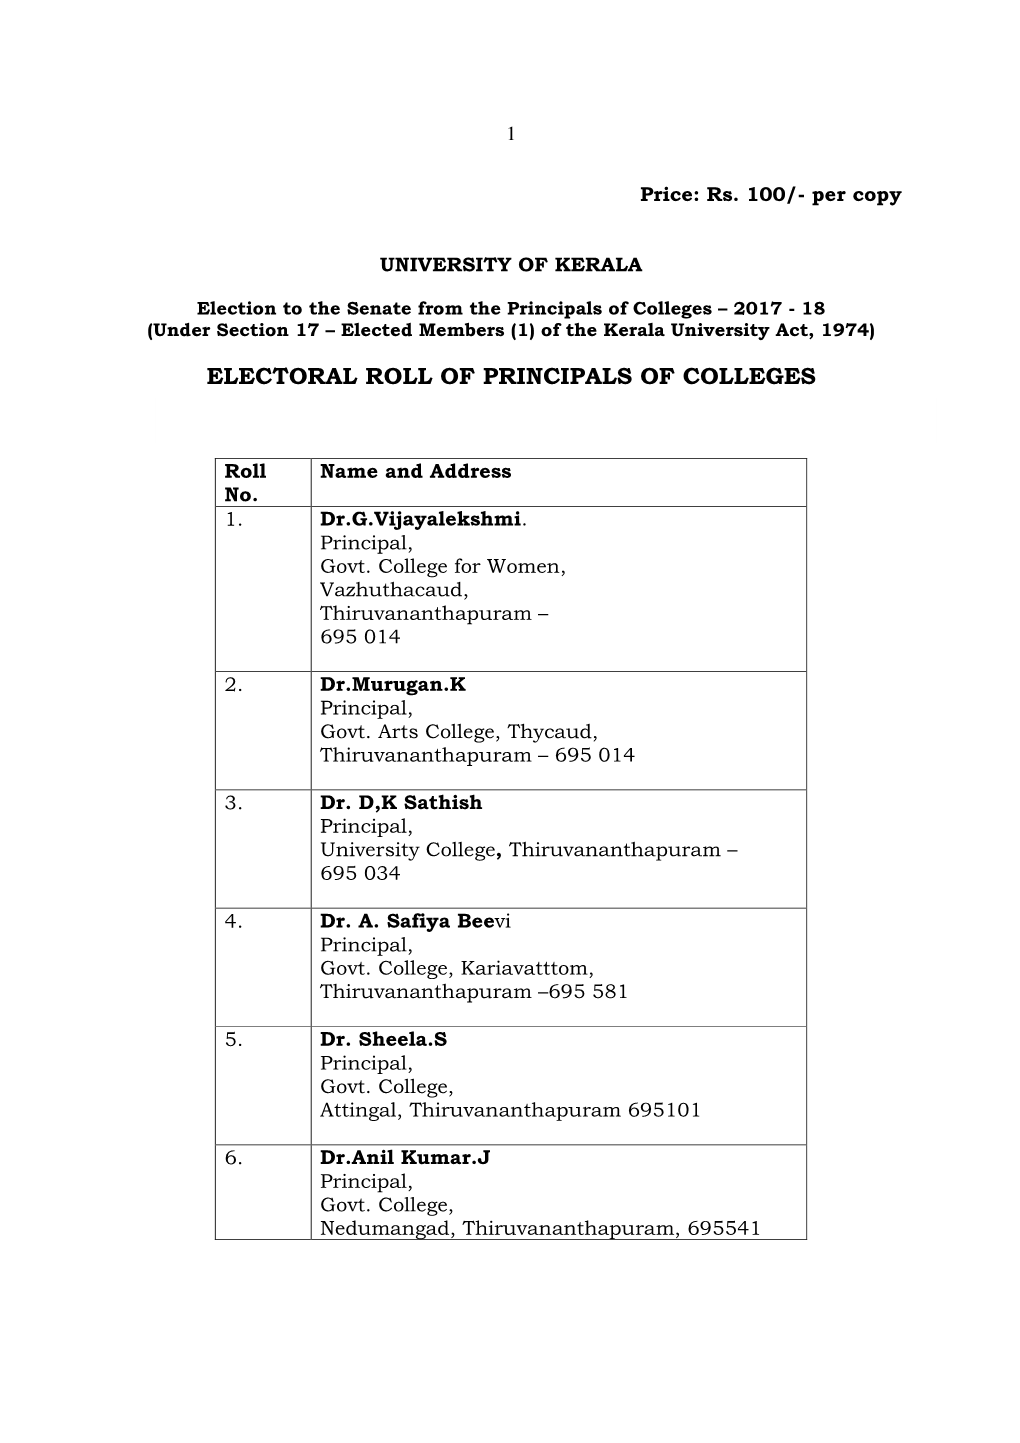 Electoral Roll of Principals of Colleges